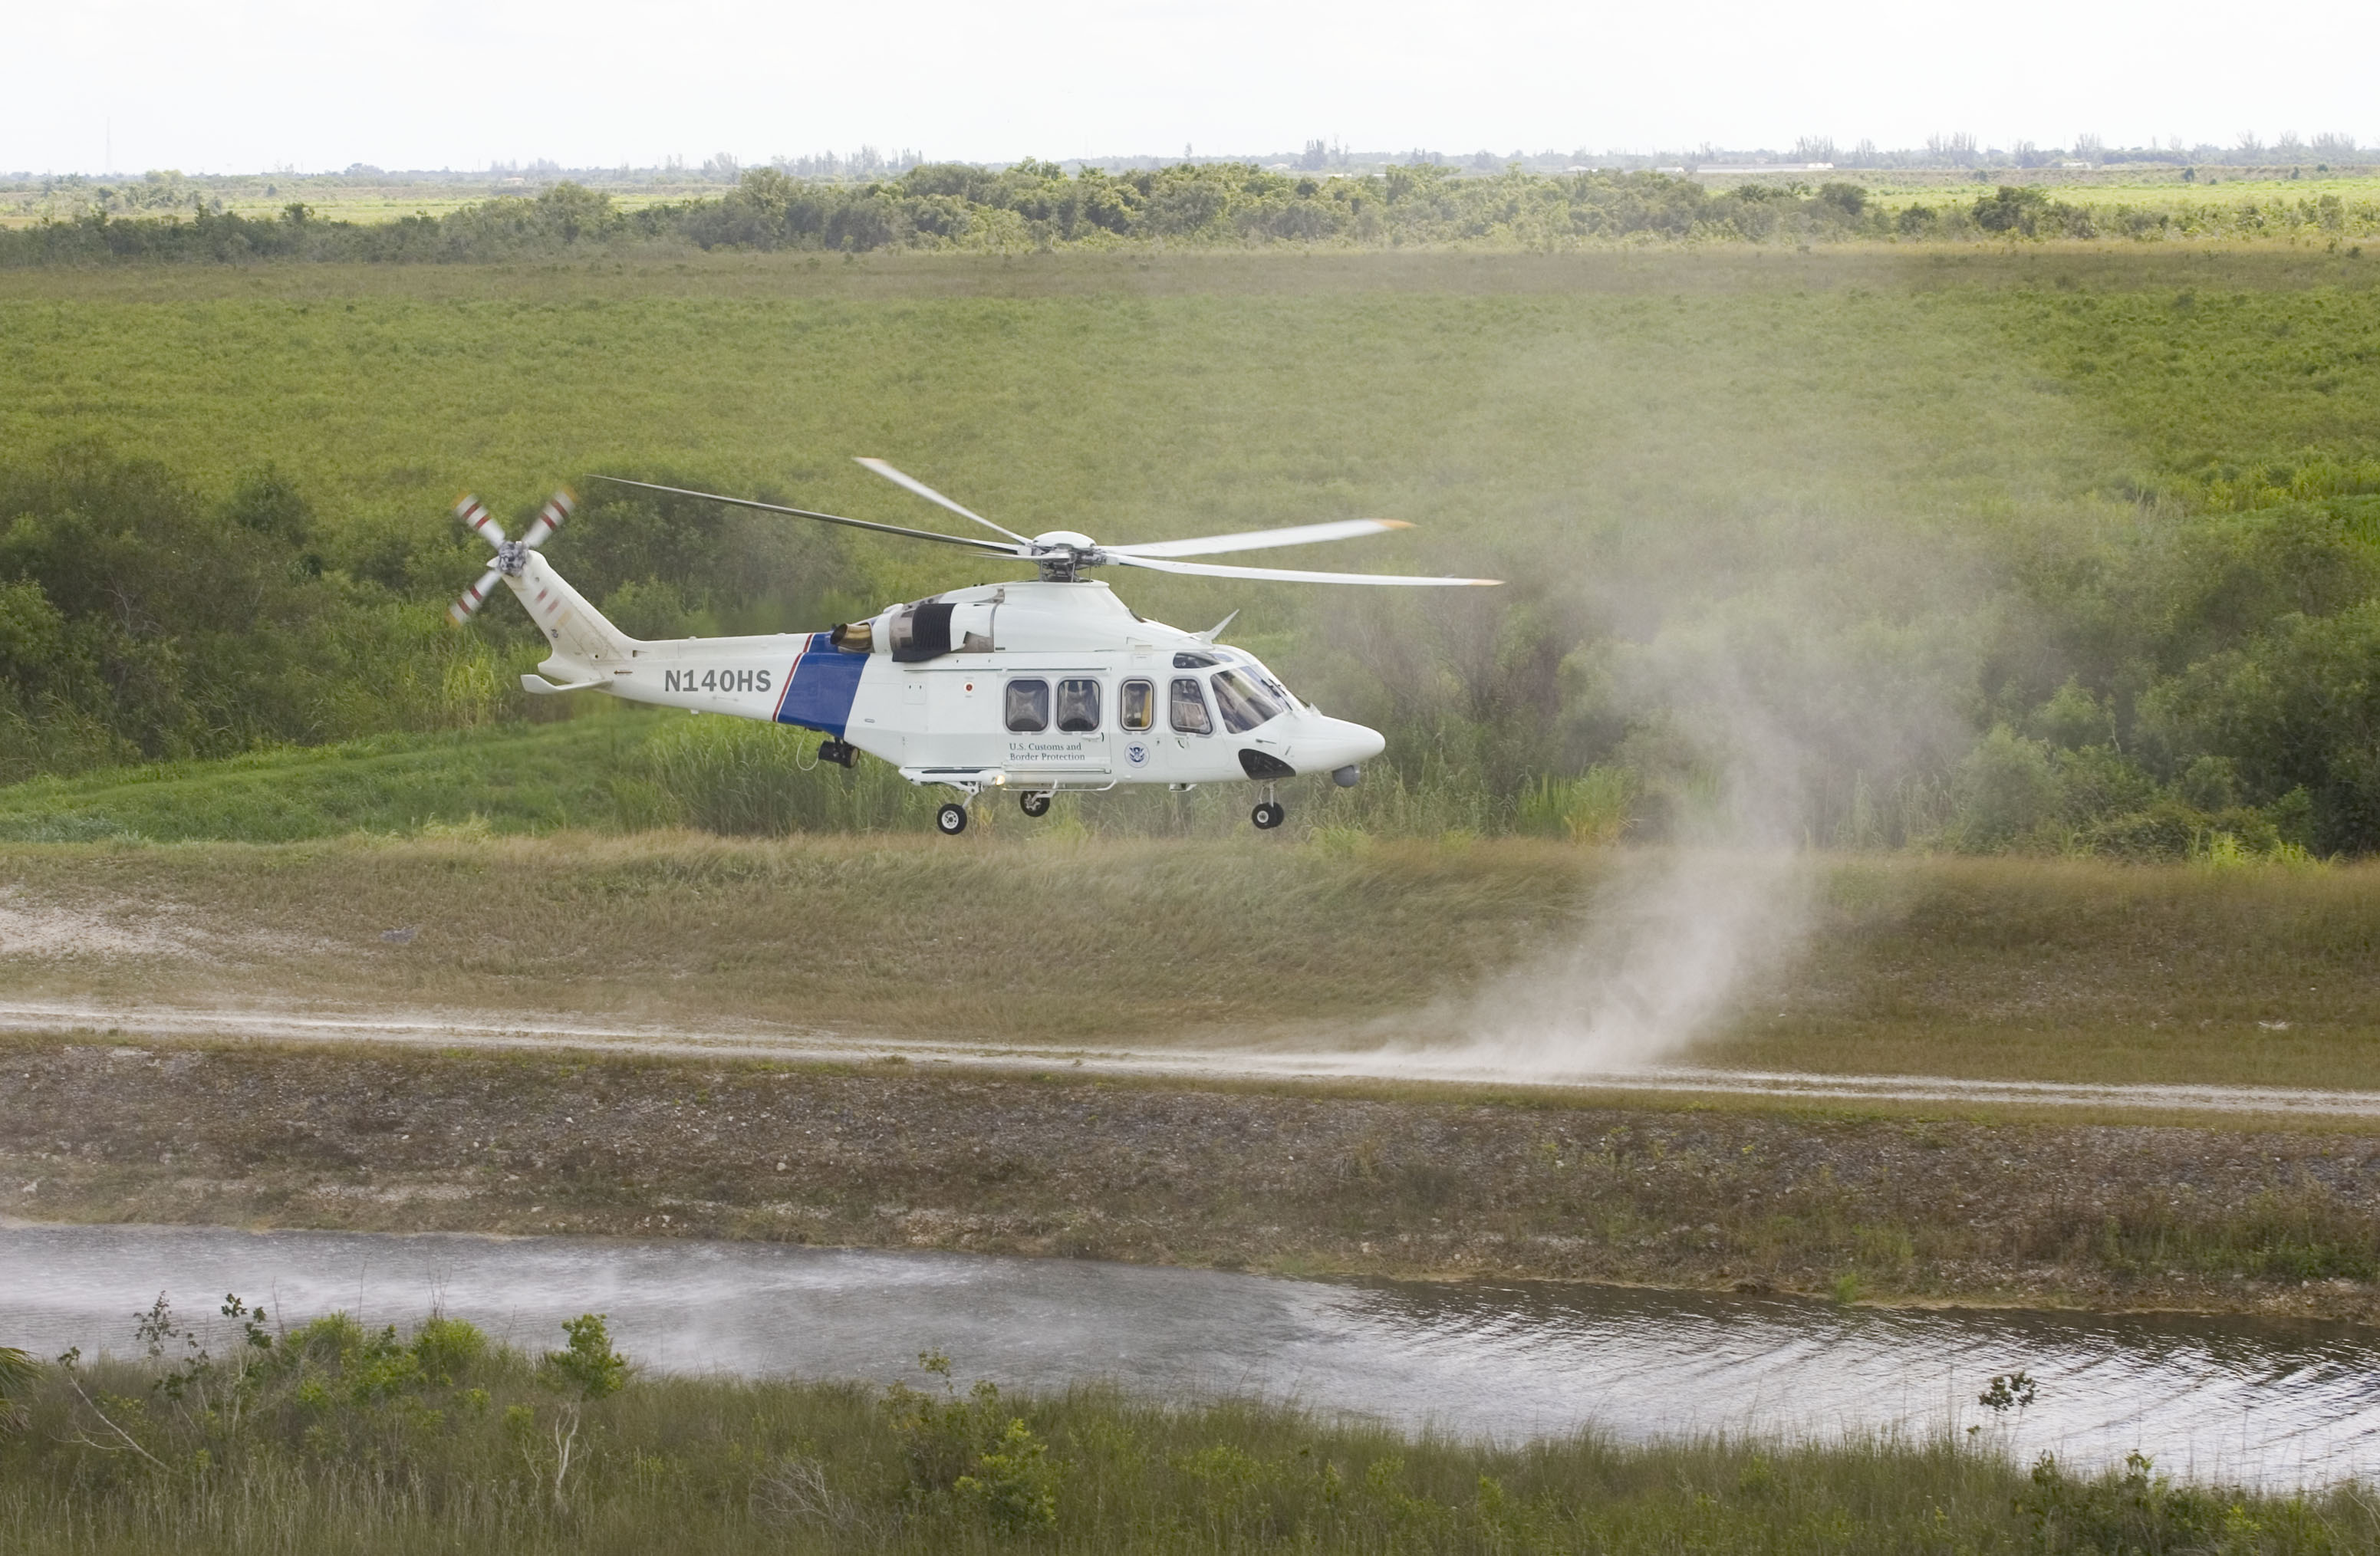 A CBP AW-139 helicopter lands in a remote area.